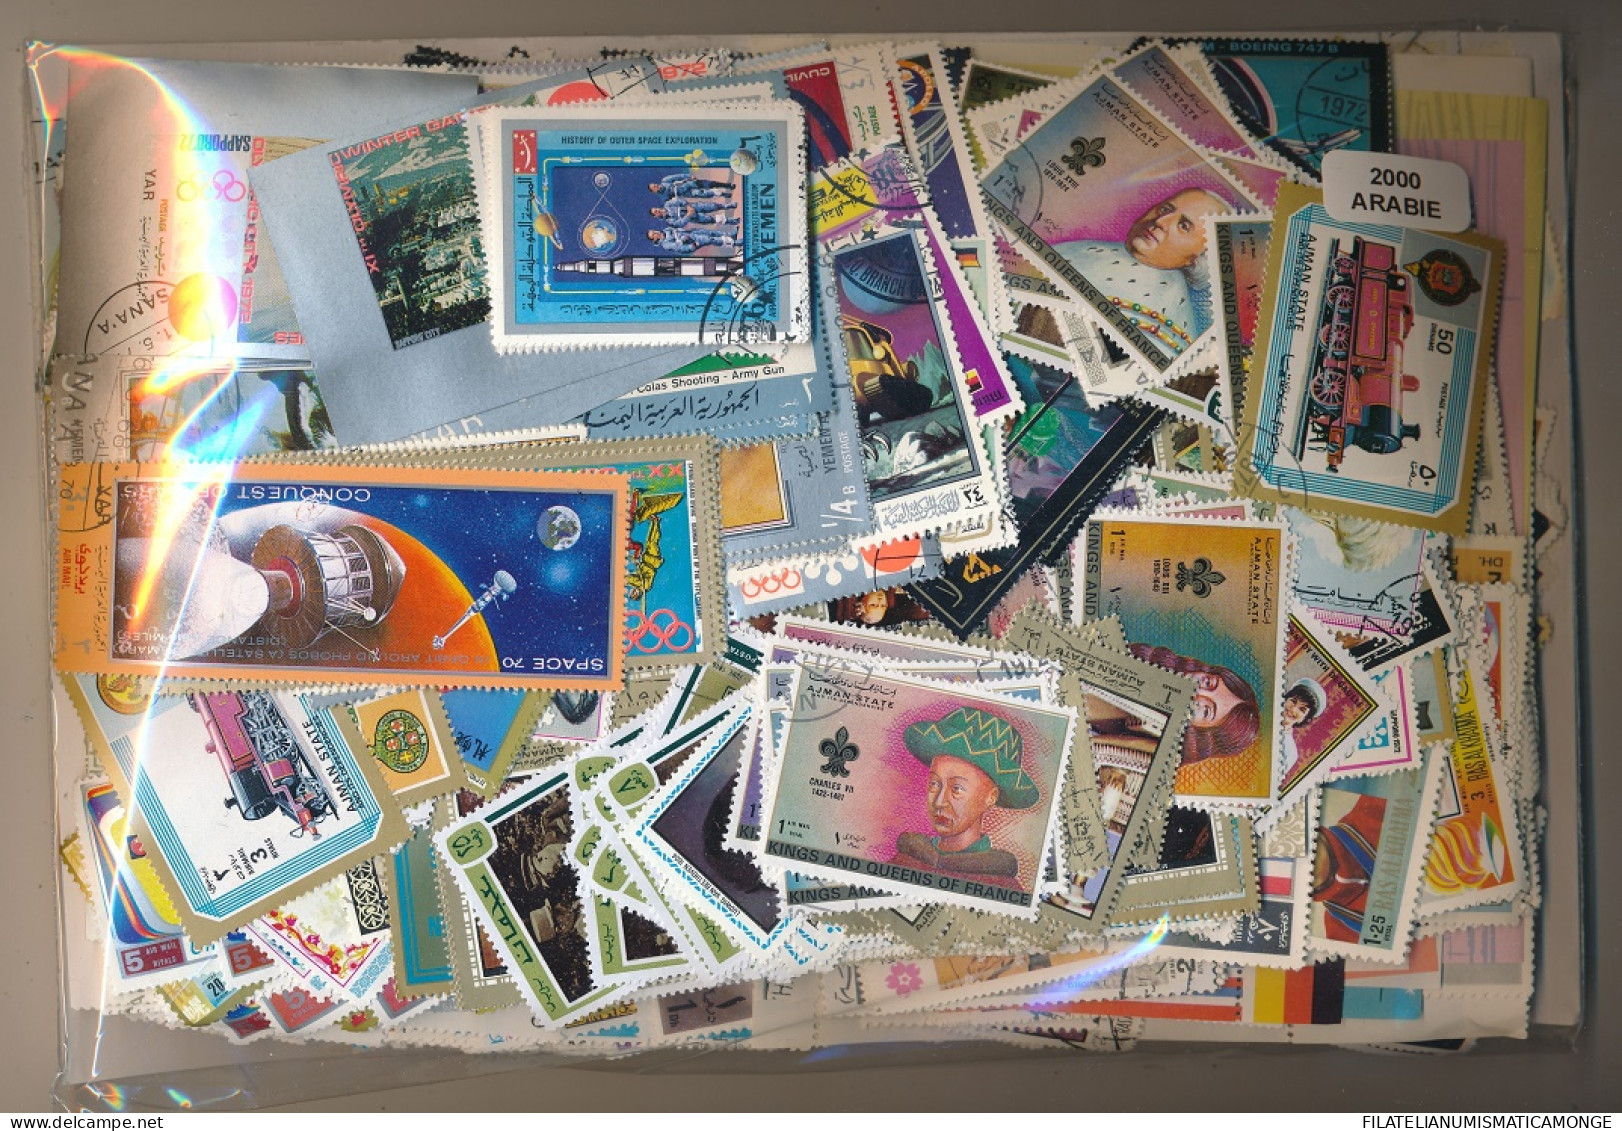  Offer - Lot Stamps - Paqueteria  Arabia 2000 Sellos Diferentes           - Vrac (min 1000 Timbres)